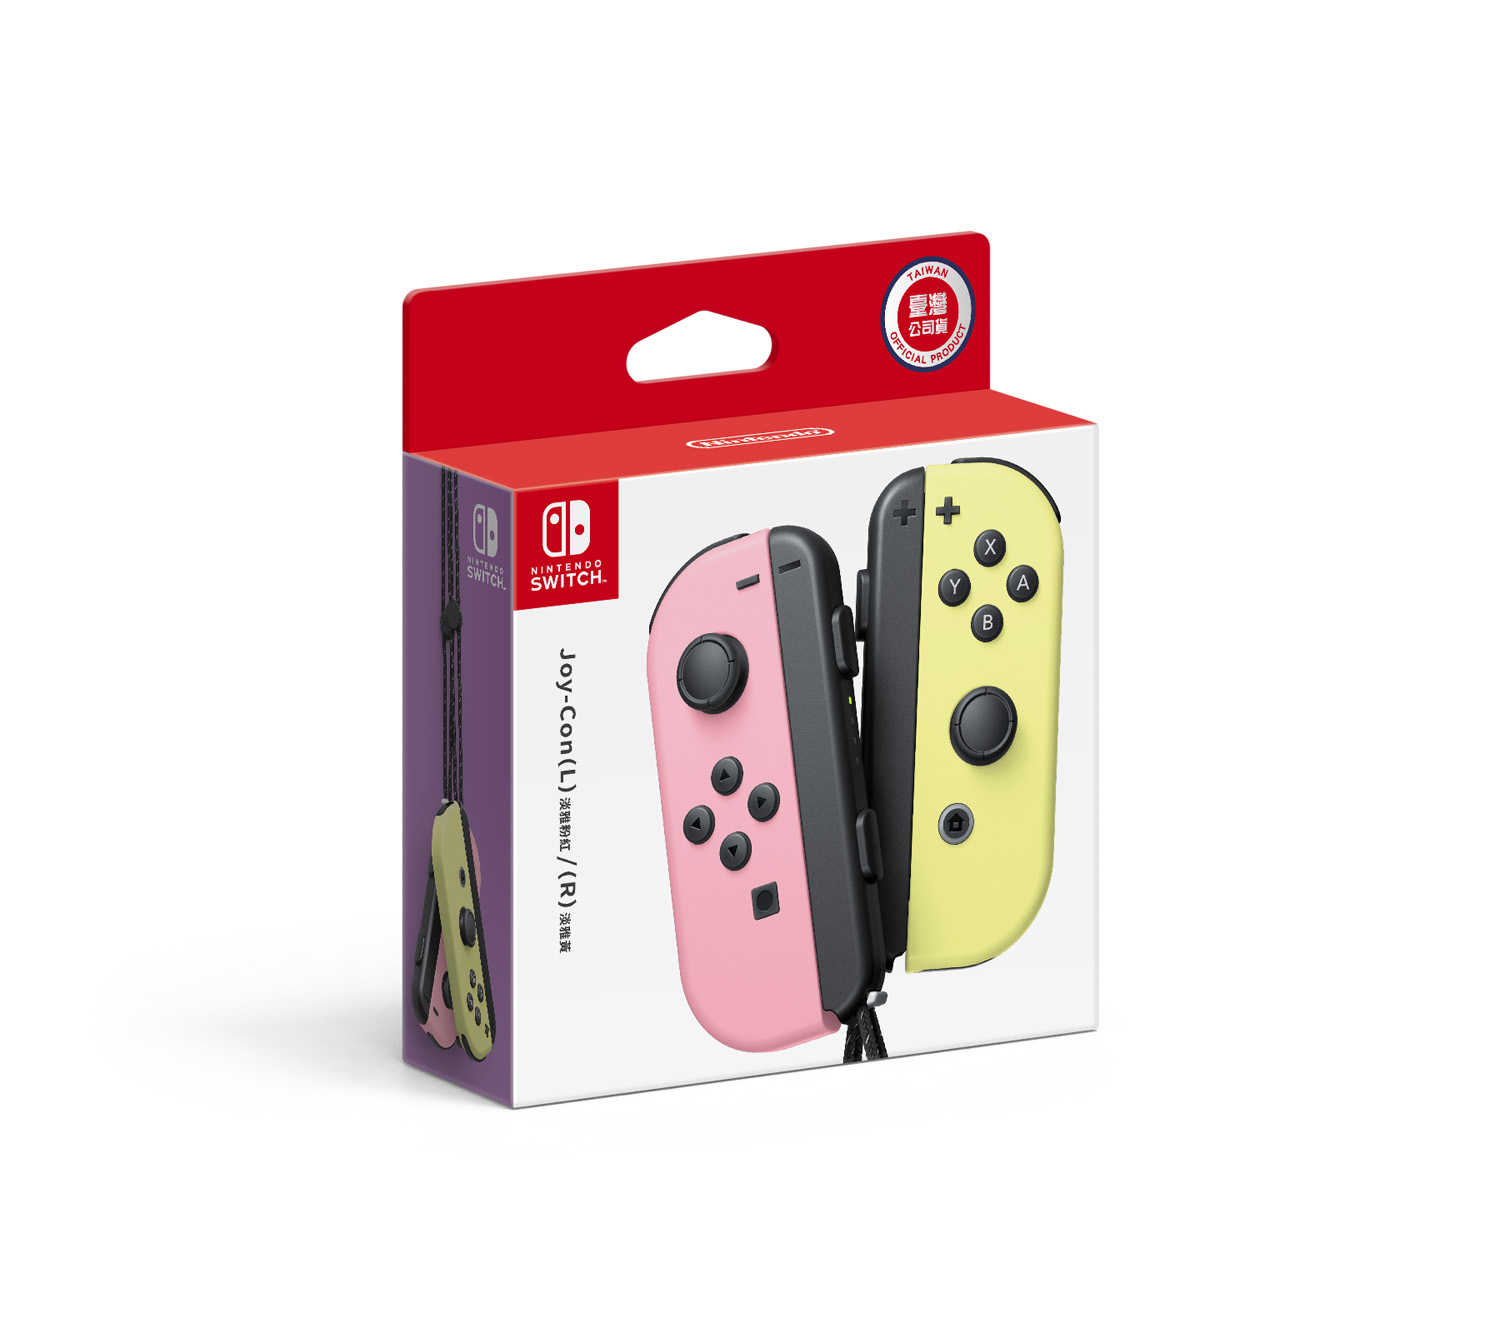 Nintendo Switch Accessories – JOY-CON, , large image number 0